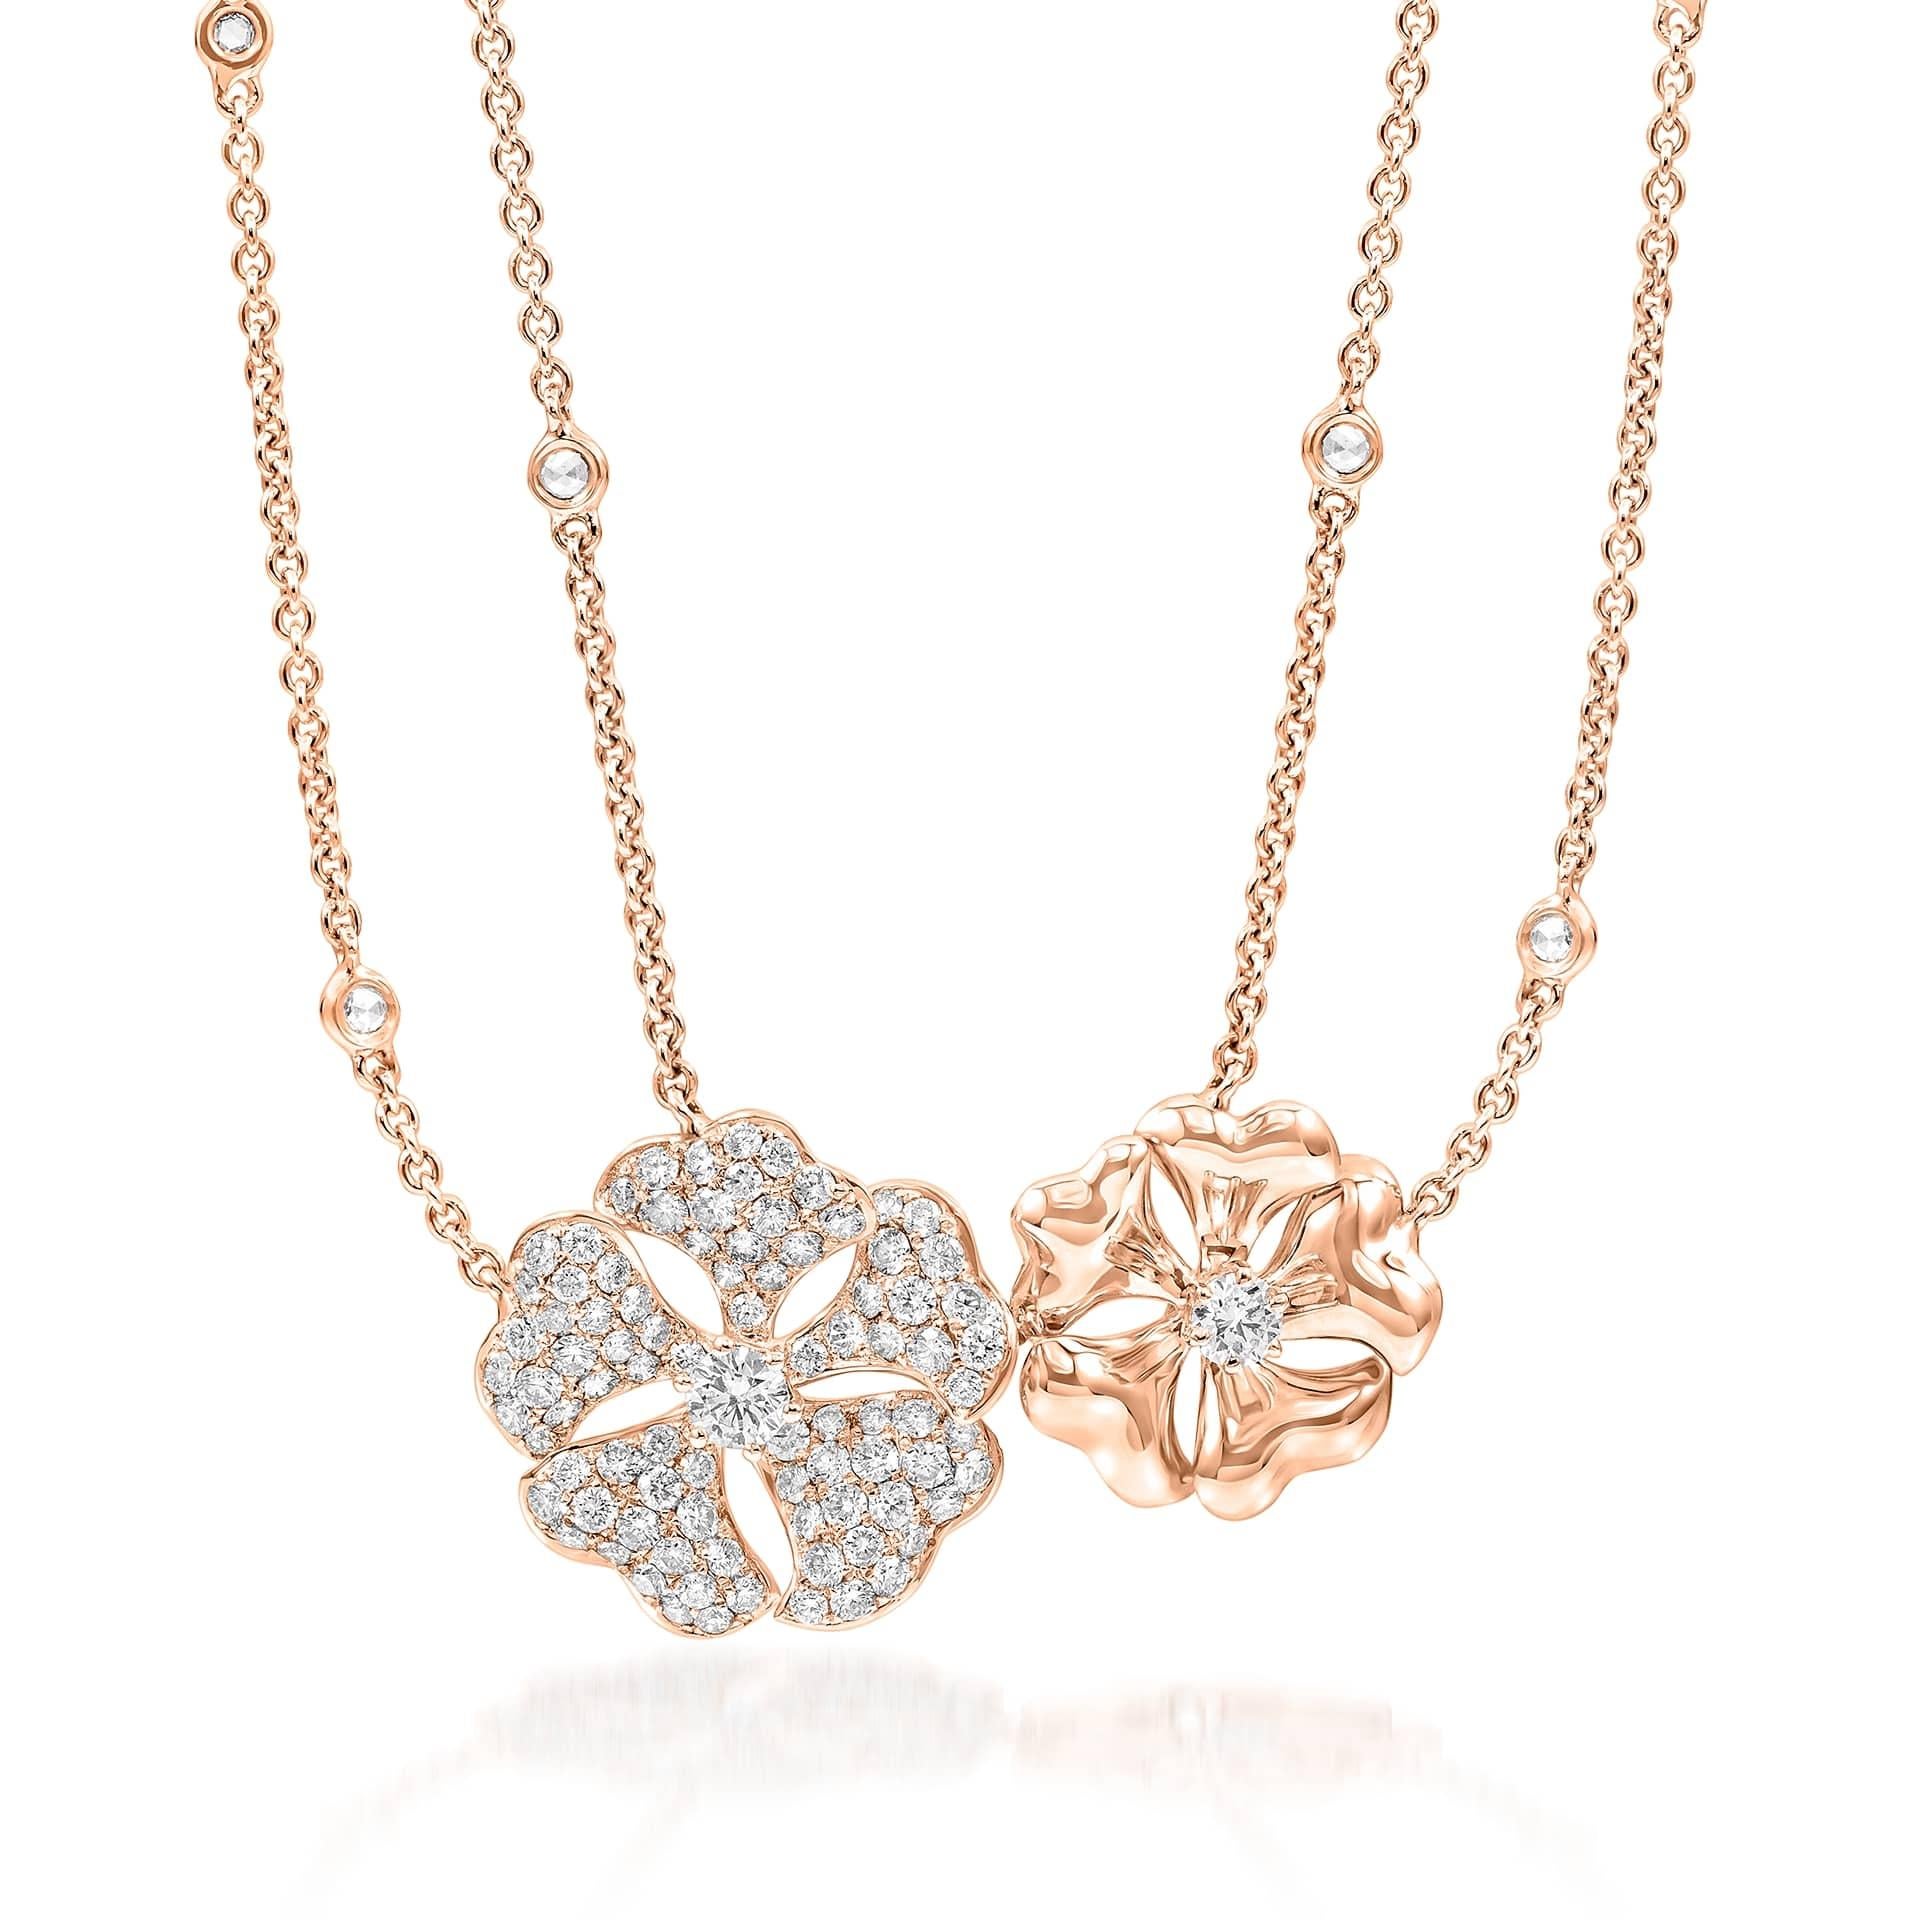 Bloom Diamond Cluster Flower Necklace in 18K Rose Gold

Inspired by the exquisite petals of the alpine cinquefoil flower, the Bloom collection combines the richness of diamonds and precious metals with the light versatility of this delicate,